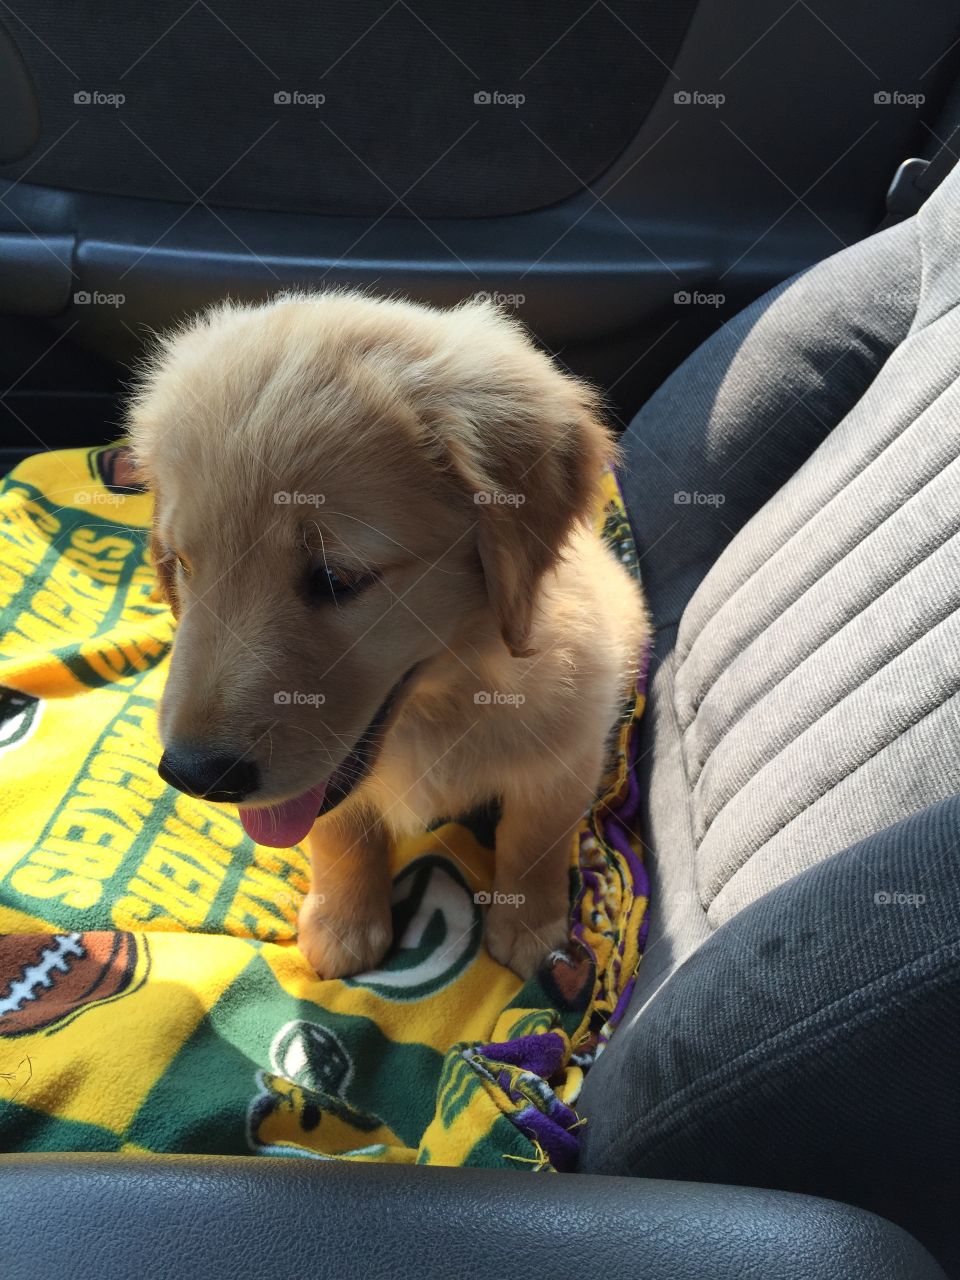 Enjoying the ride home from adoption!